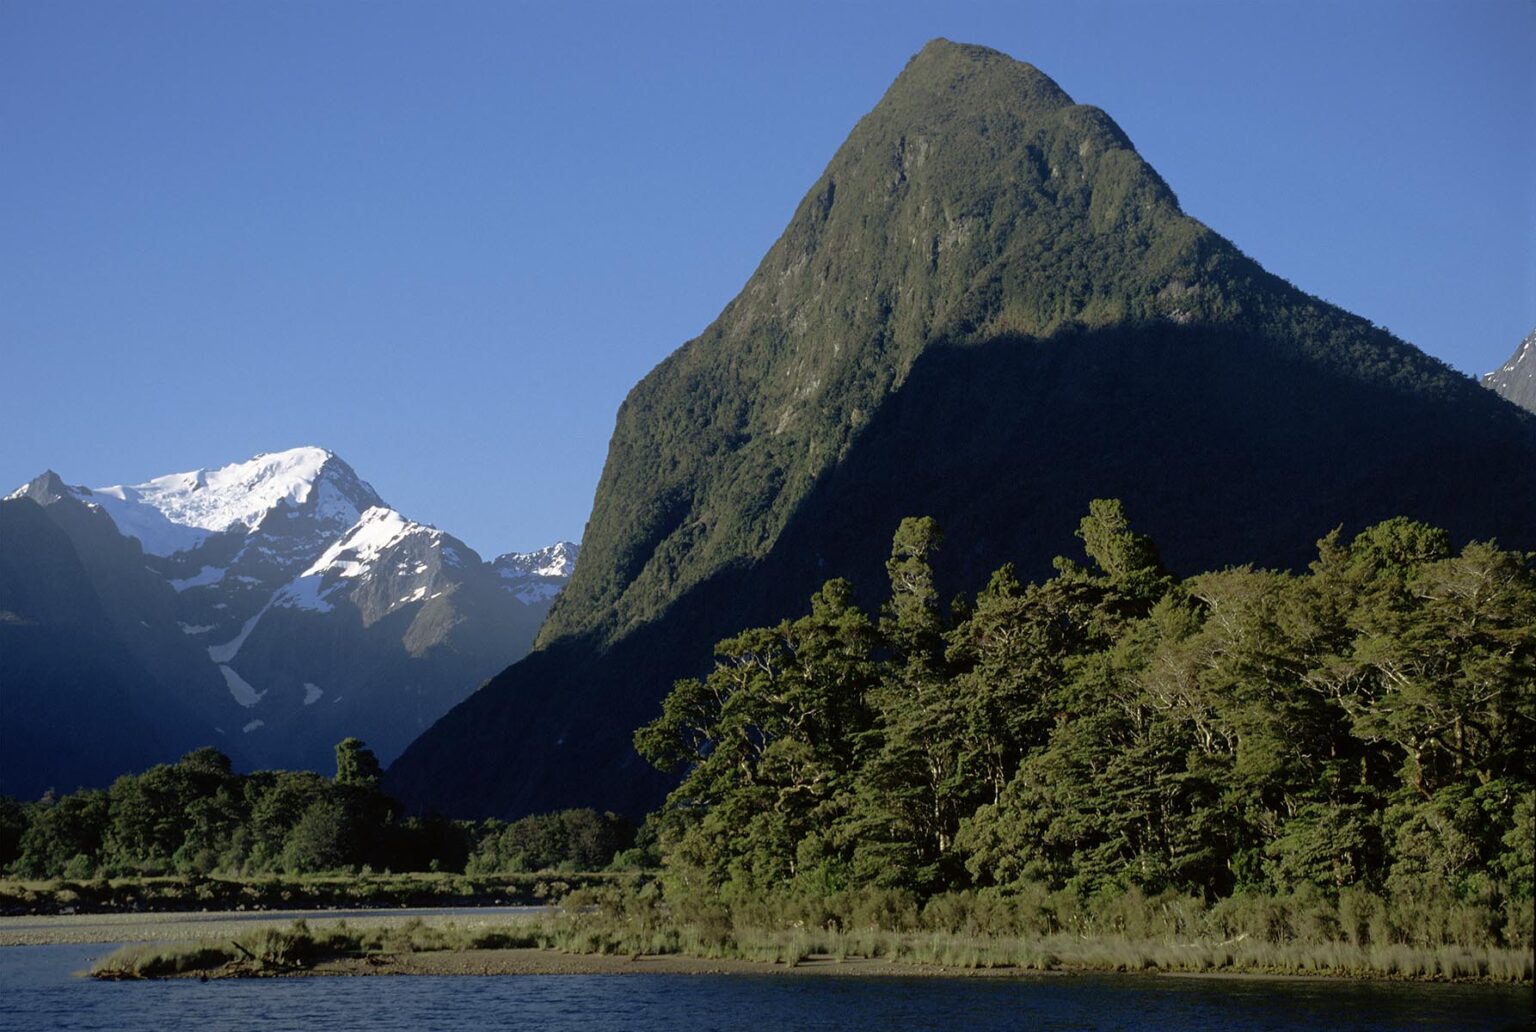 MT PEMBROKE & the spectacular MILFORD SOUND - FIORDLAND NATIONAL PARK, NEW ZEALAND, SOUTH ISLAND